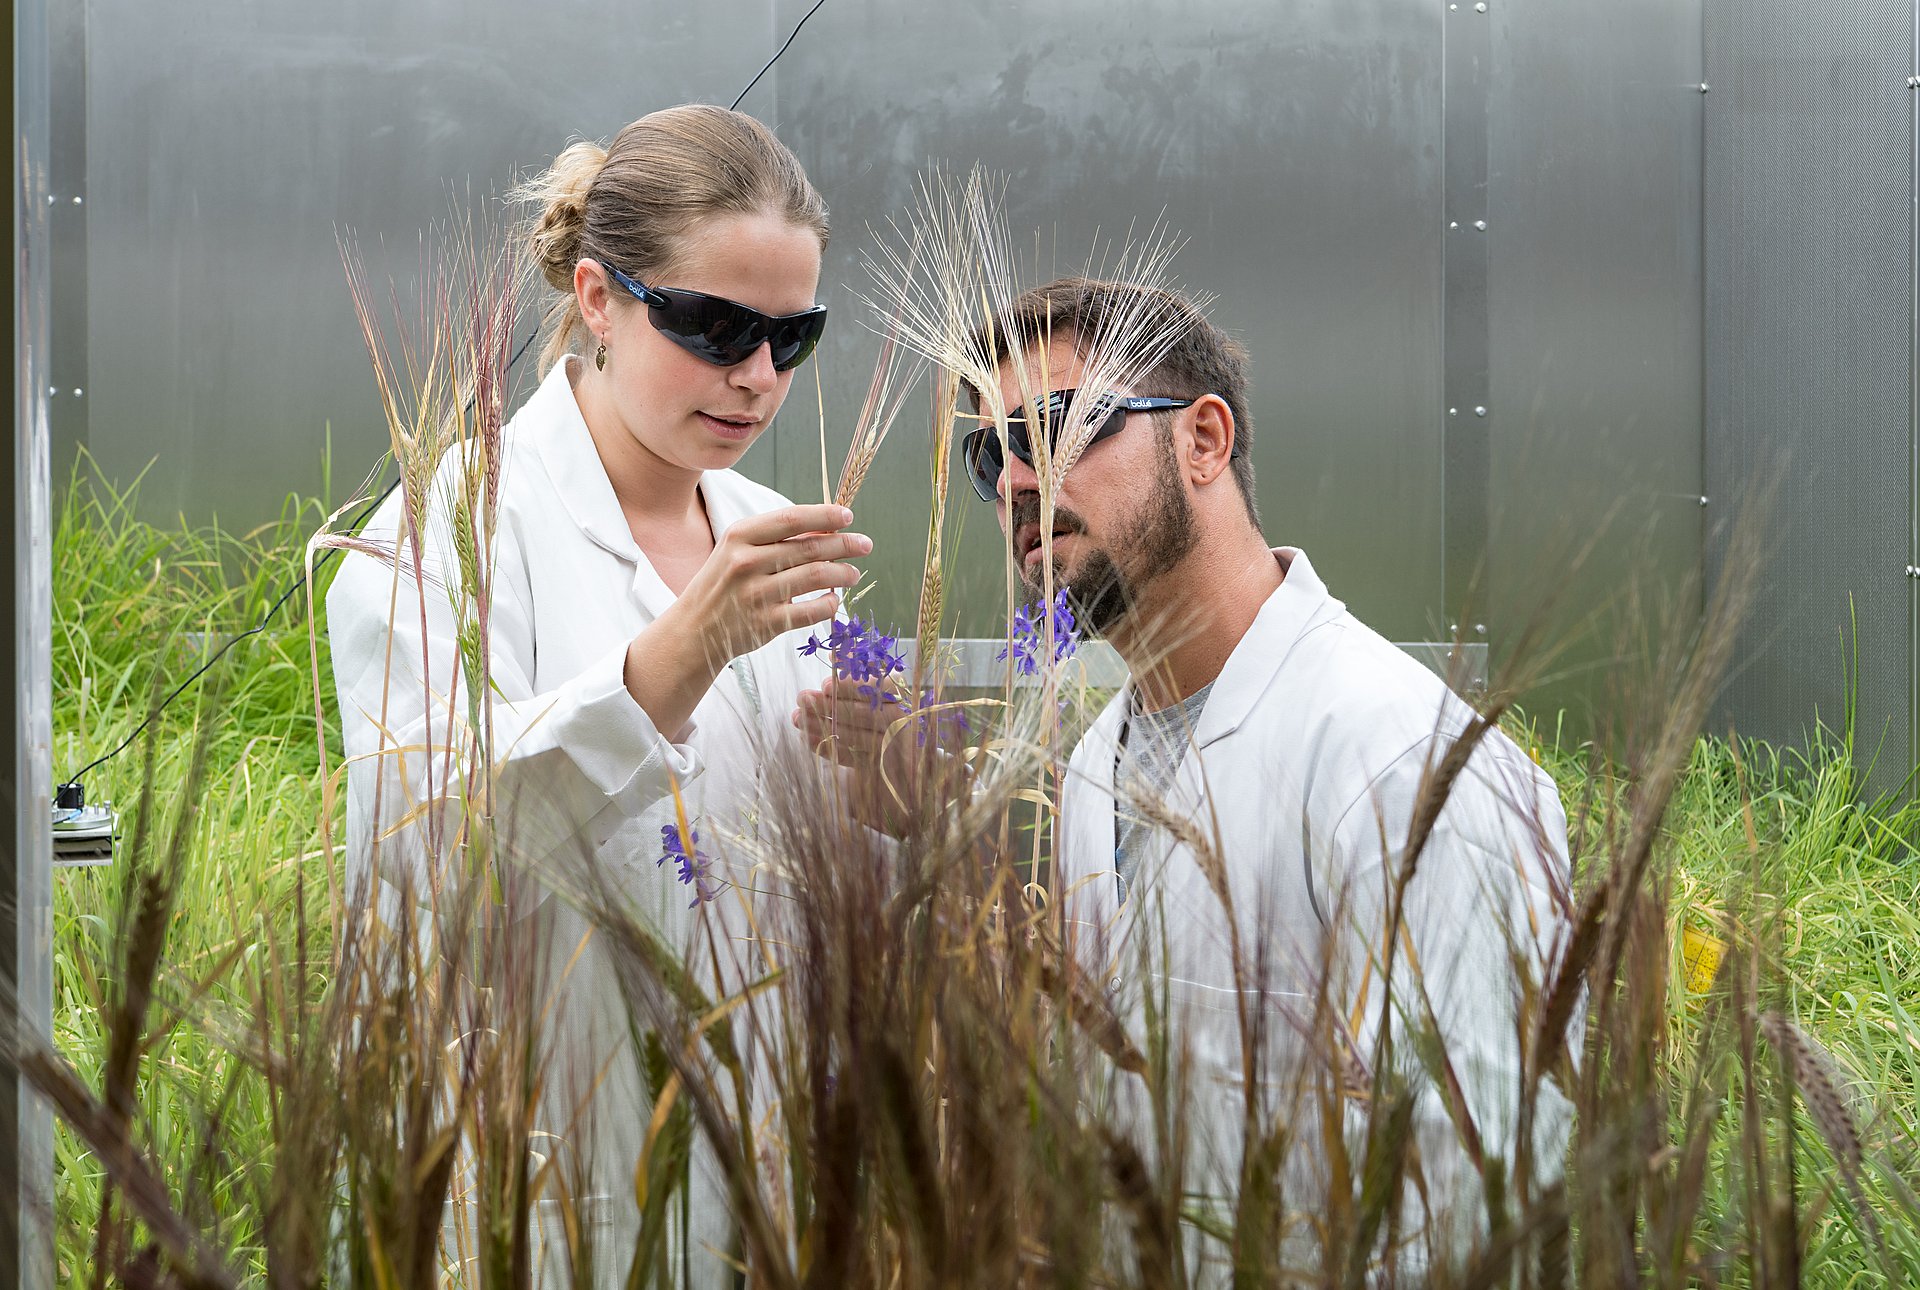 Members of a research group analyze experimental plants in the climate chamber